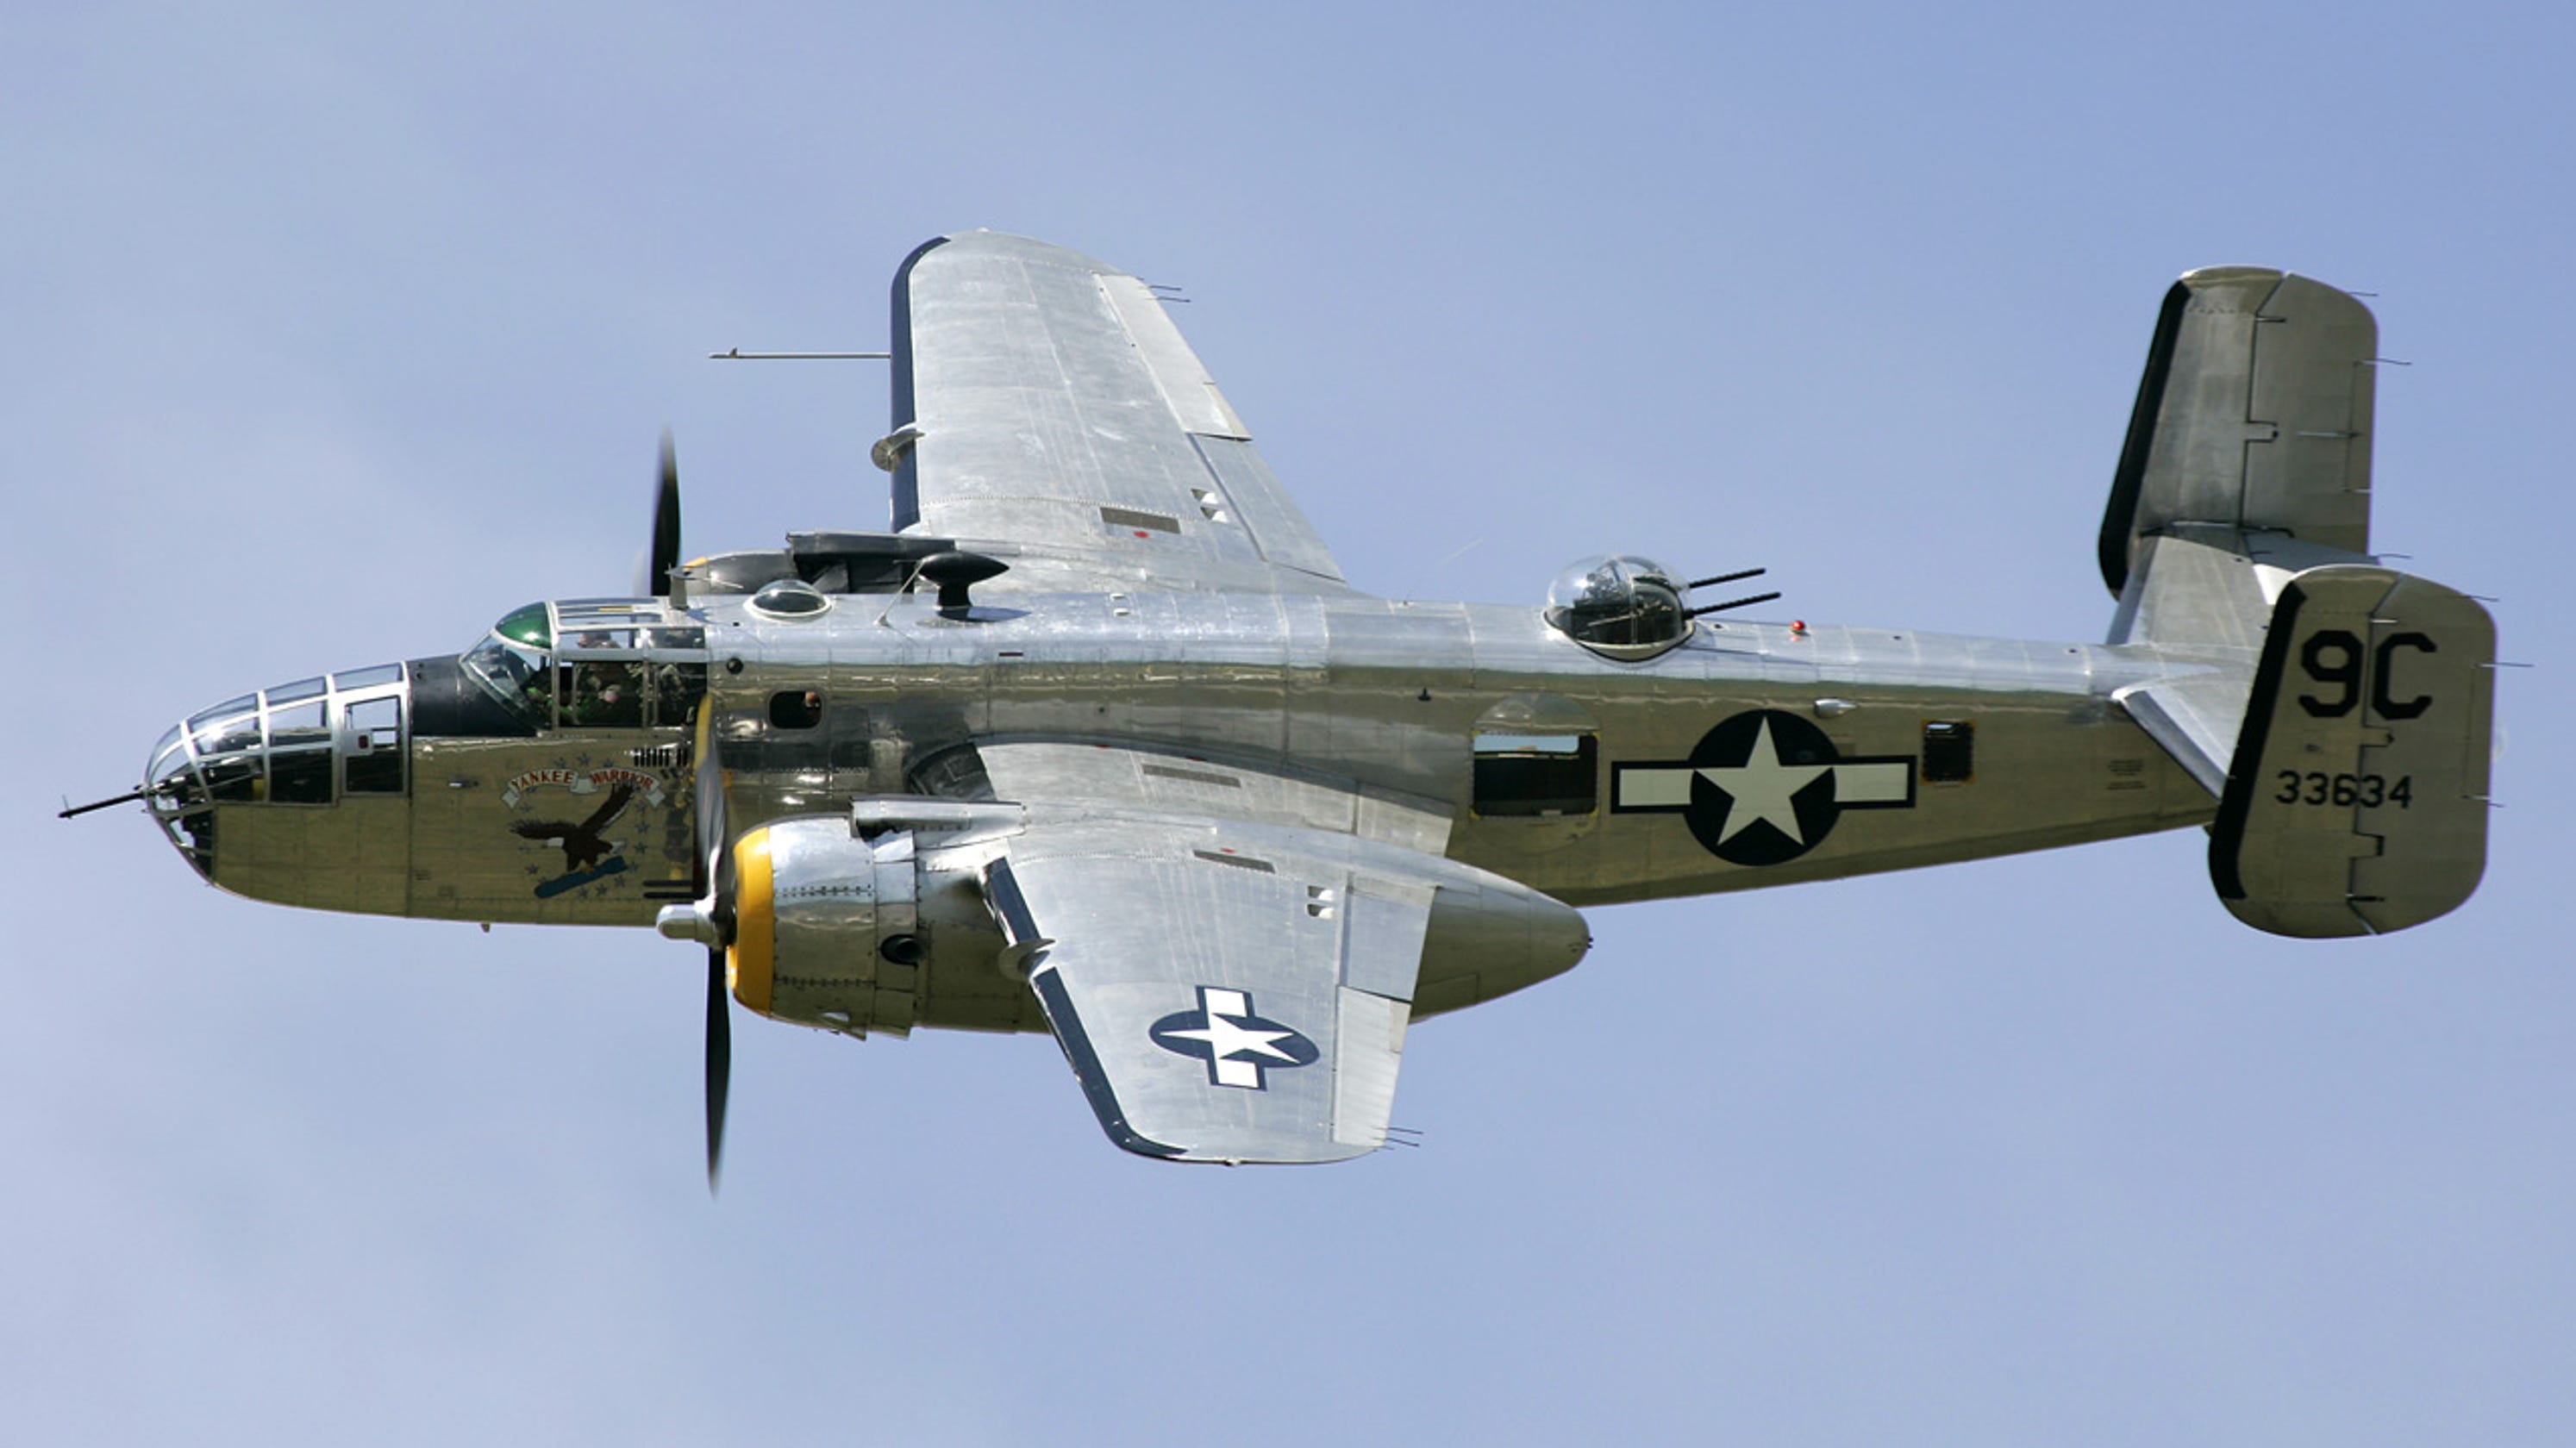 Vintage Wwii Aircraft Flyover Scheduled Ahead Of Detroit Fireworks ...